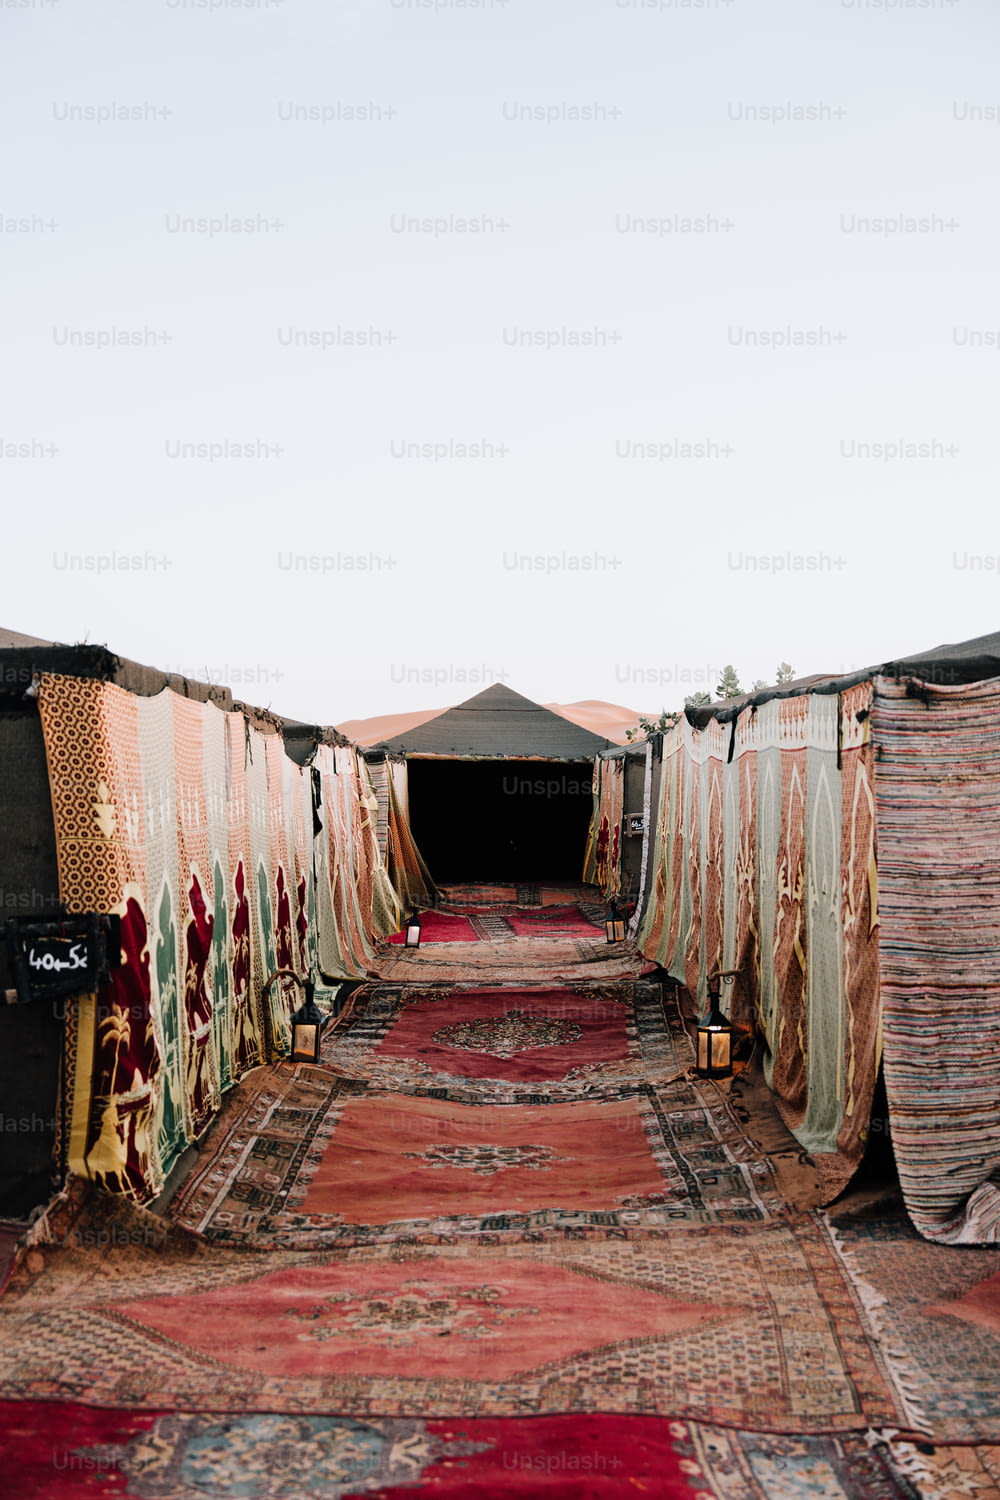 a group of tents sitting next to each other on top of a rug